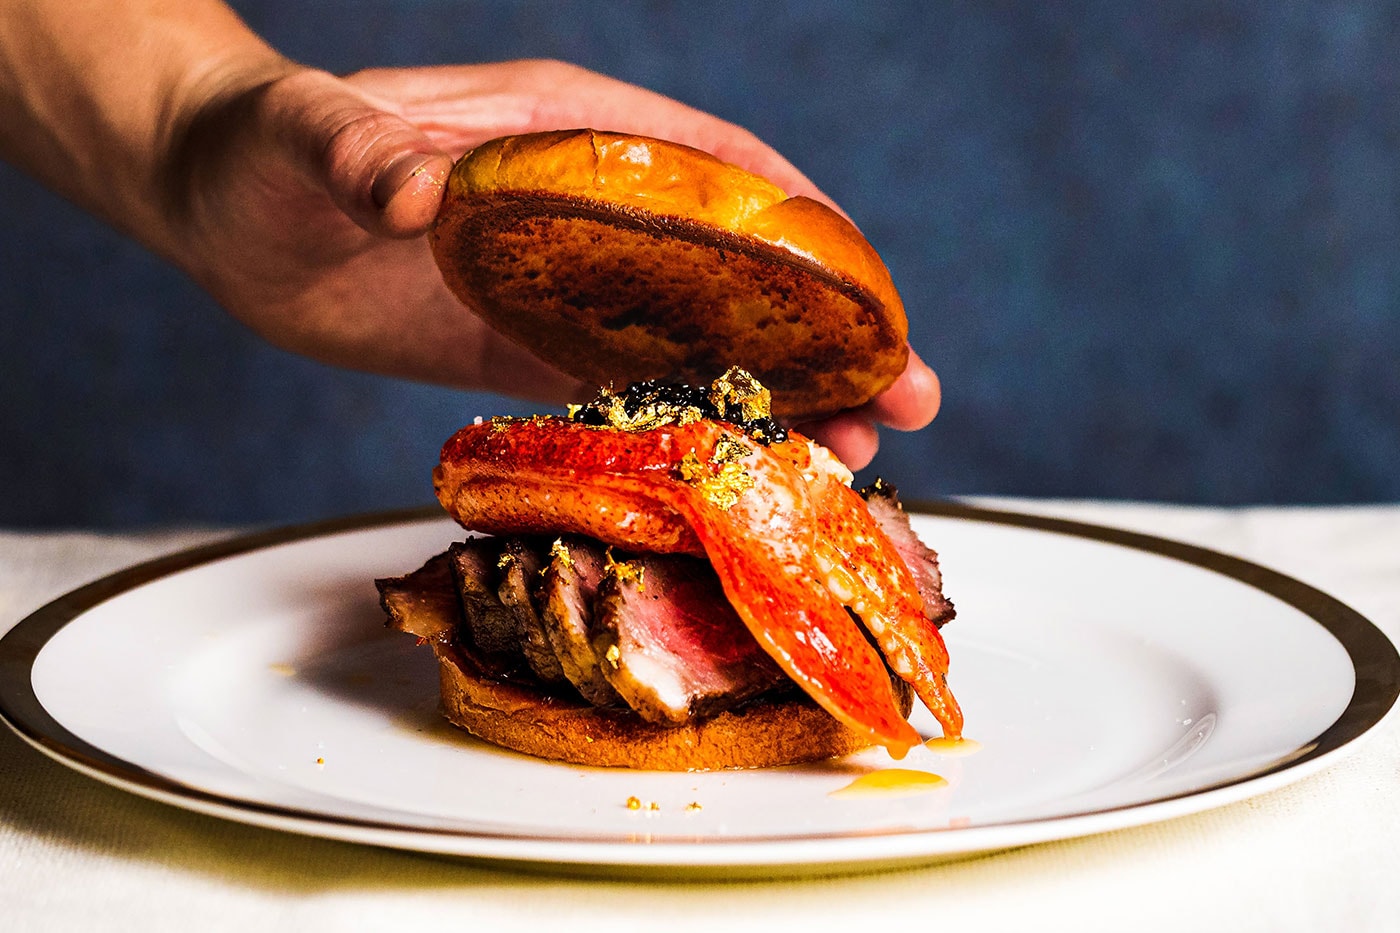 Get Main Lobster Montecito Lobster roll kit for four $1000 USD most expensive a5 wagyu four brioche rolls normandy butter gold flakes pearl caviar spoon oyster shucker release info